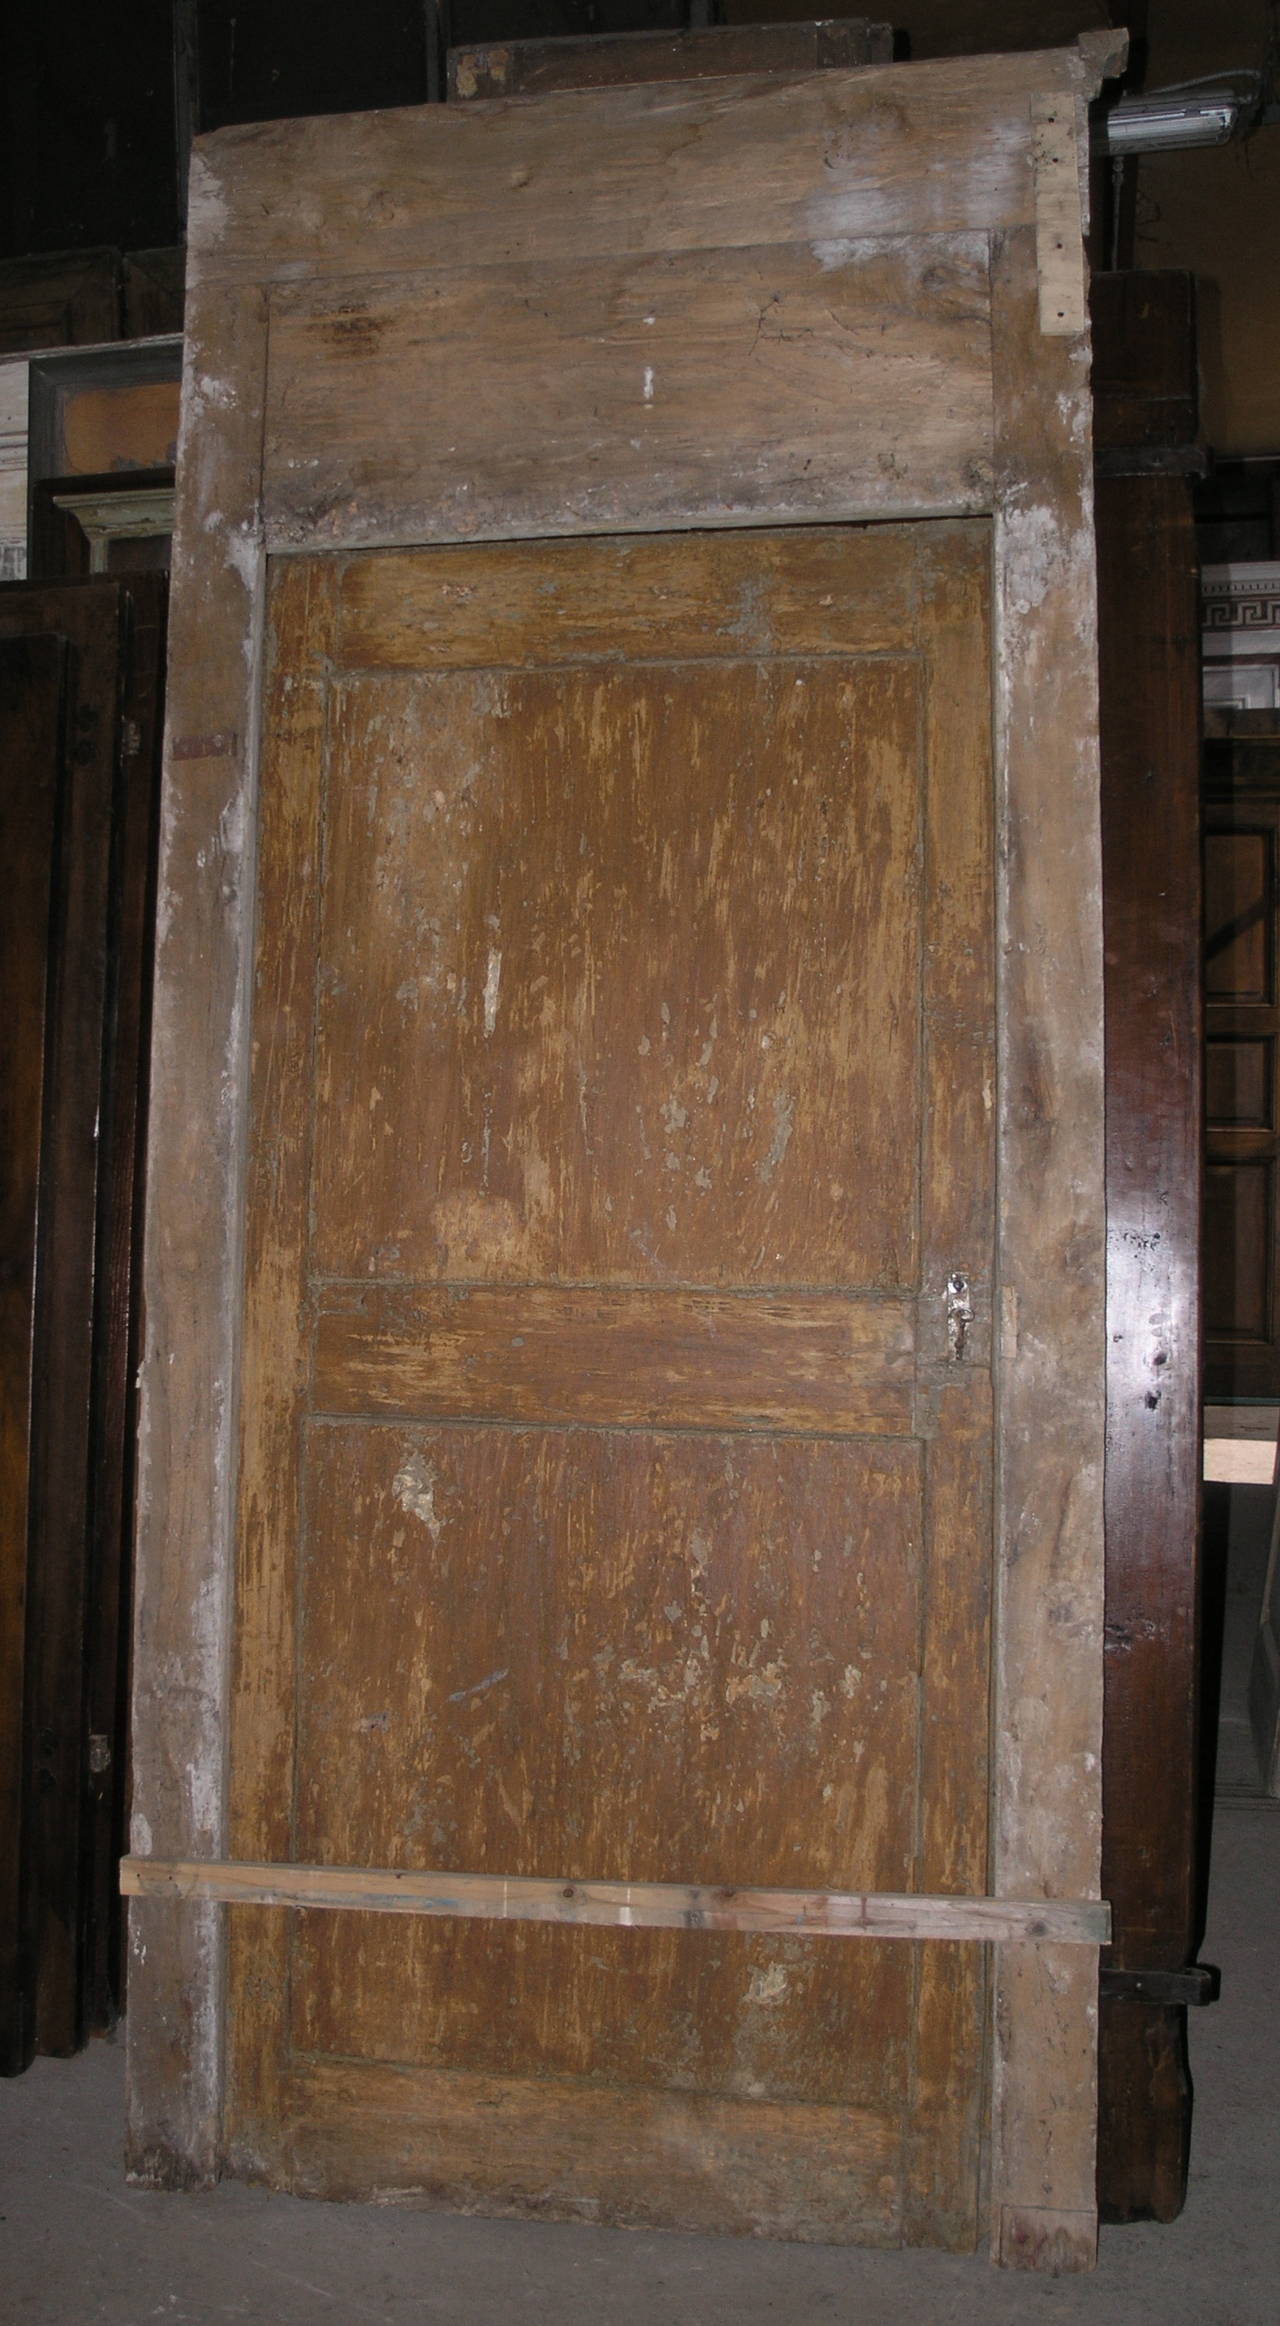 Antique Lacquered Door
with original frame 
Comes from Piemonte